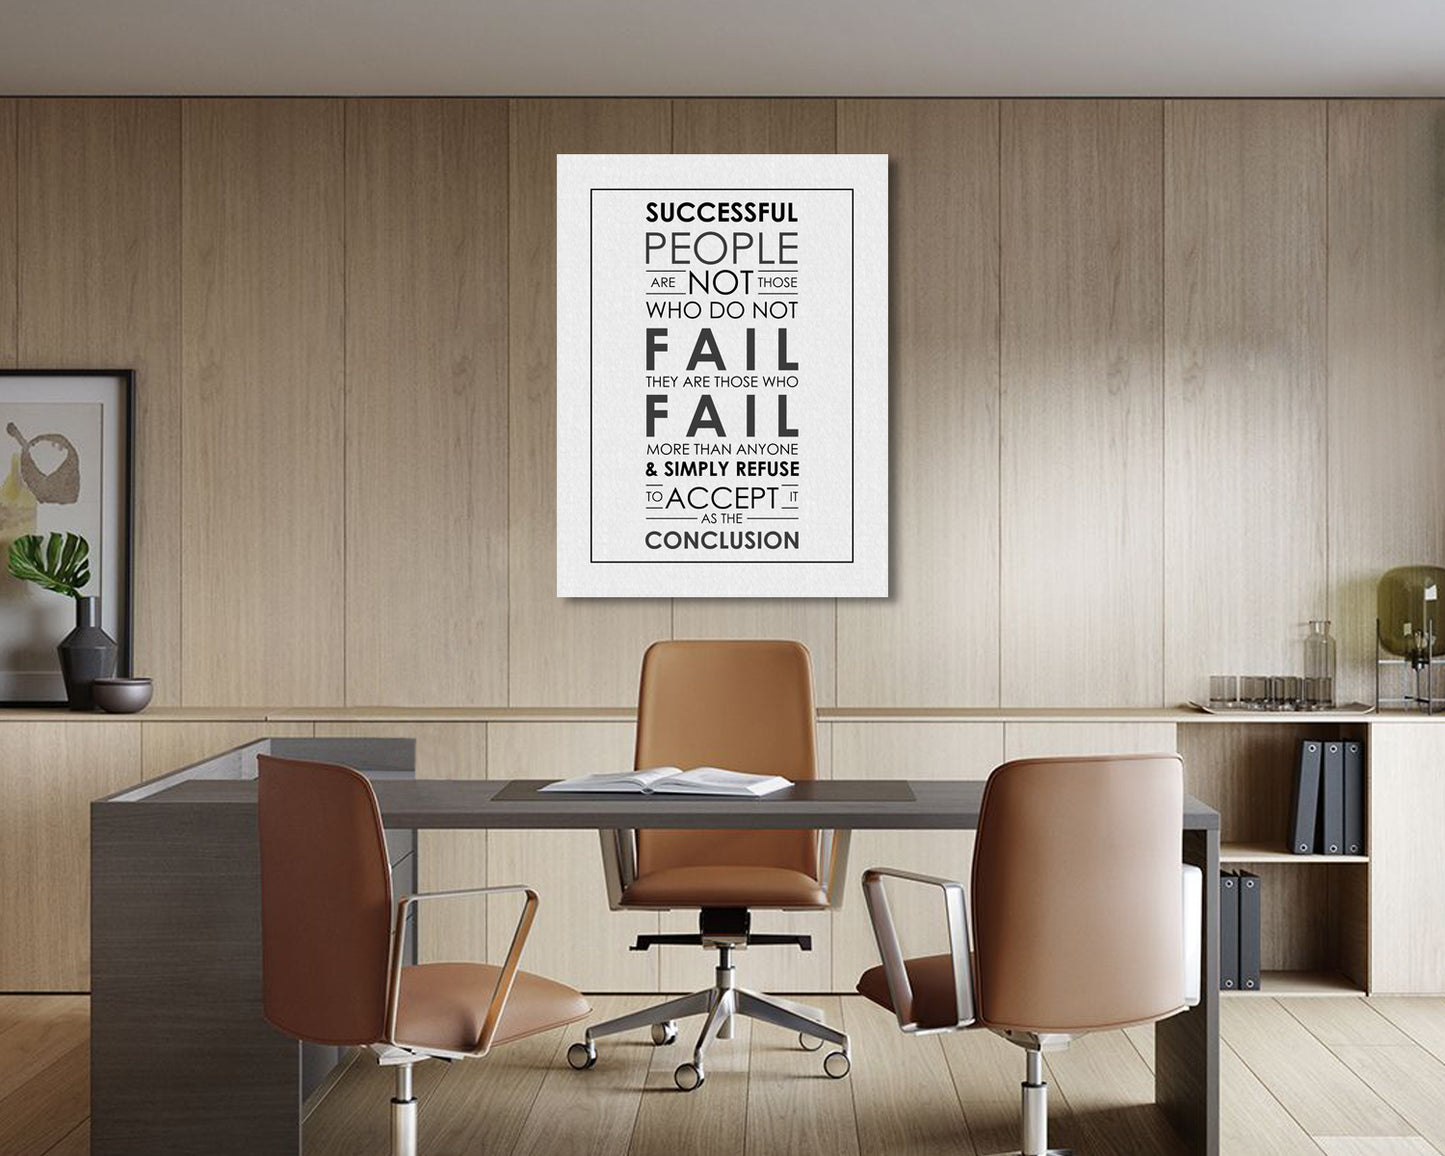 Successful people are not those who do not fail Canvas Wall Art 